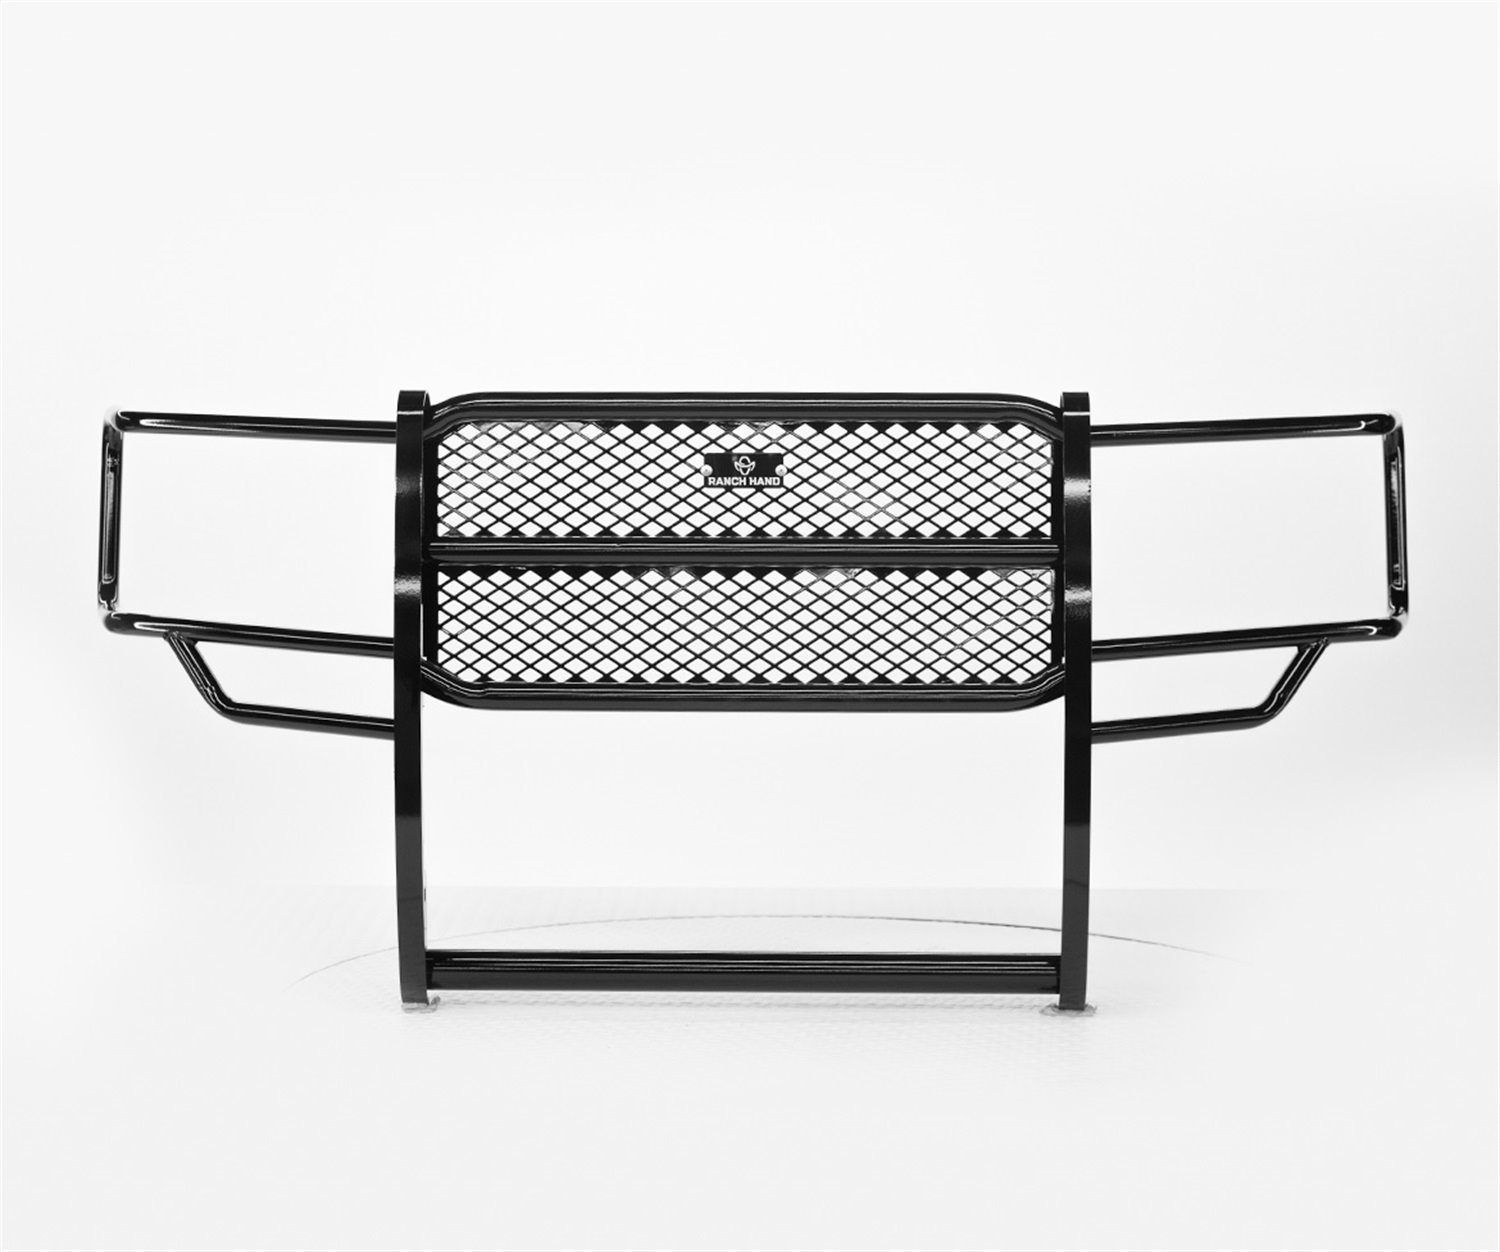 Legend Series Grille Guard For 2014-2015 GMC 1500